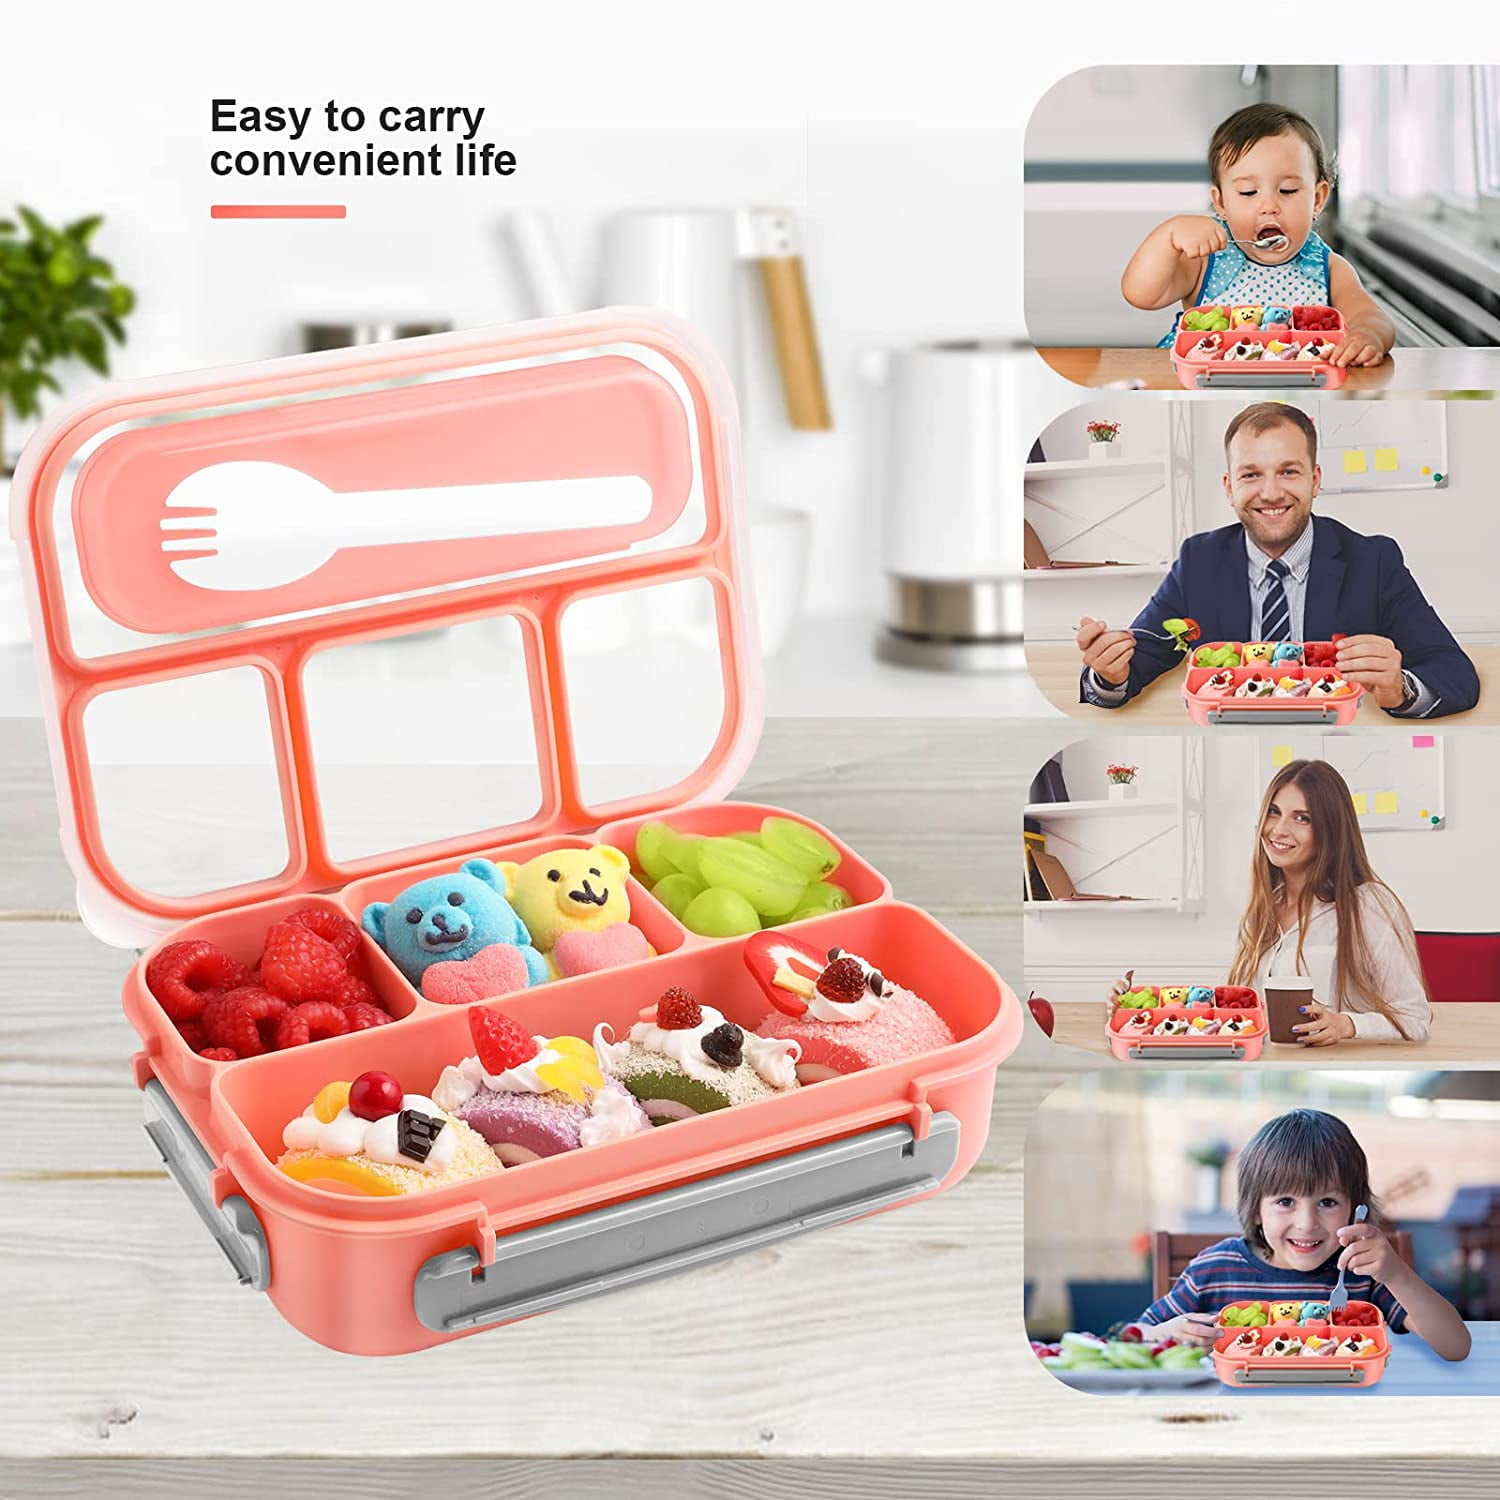 Cute Lunch Box Insulated Lunch Bag Bento Box Food Container Storage Boxes with Cutlery for Adults Office Camping 2 Tiersblue U2026